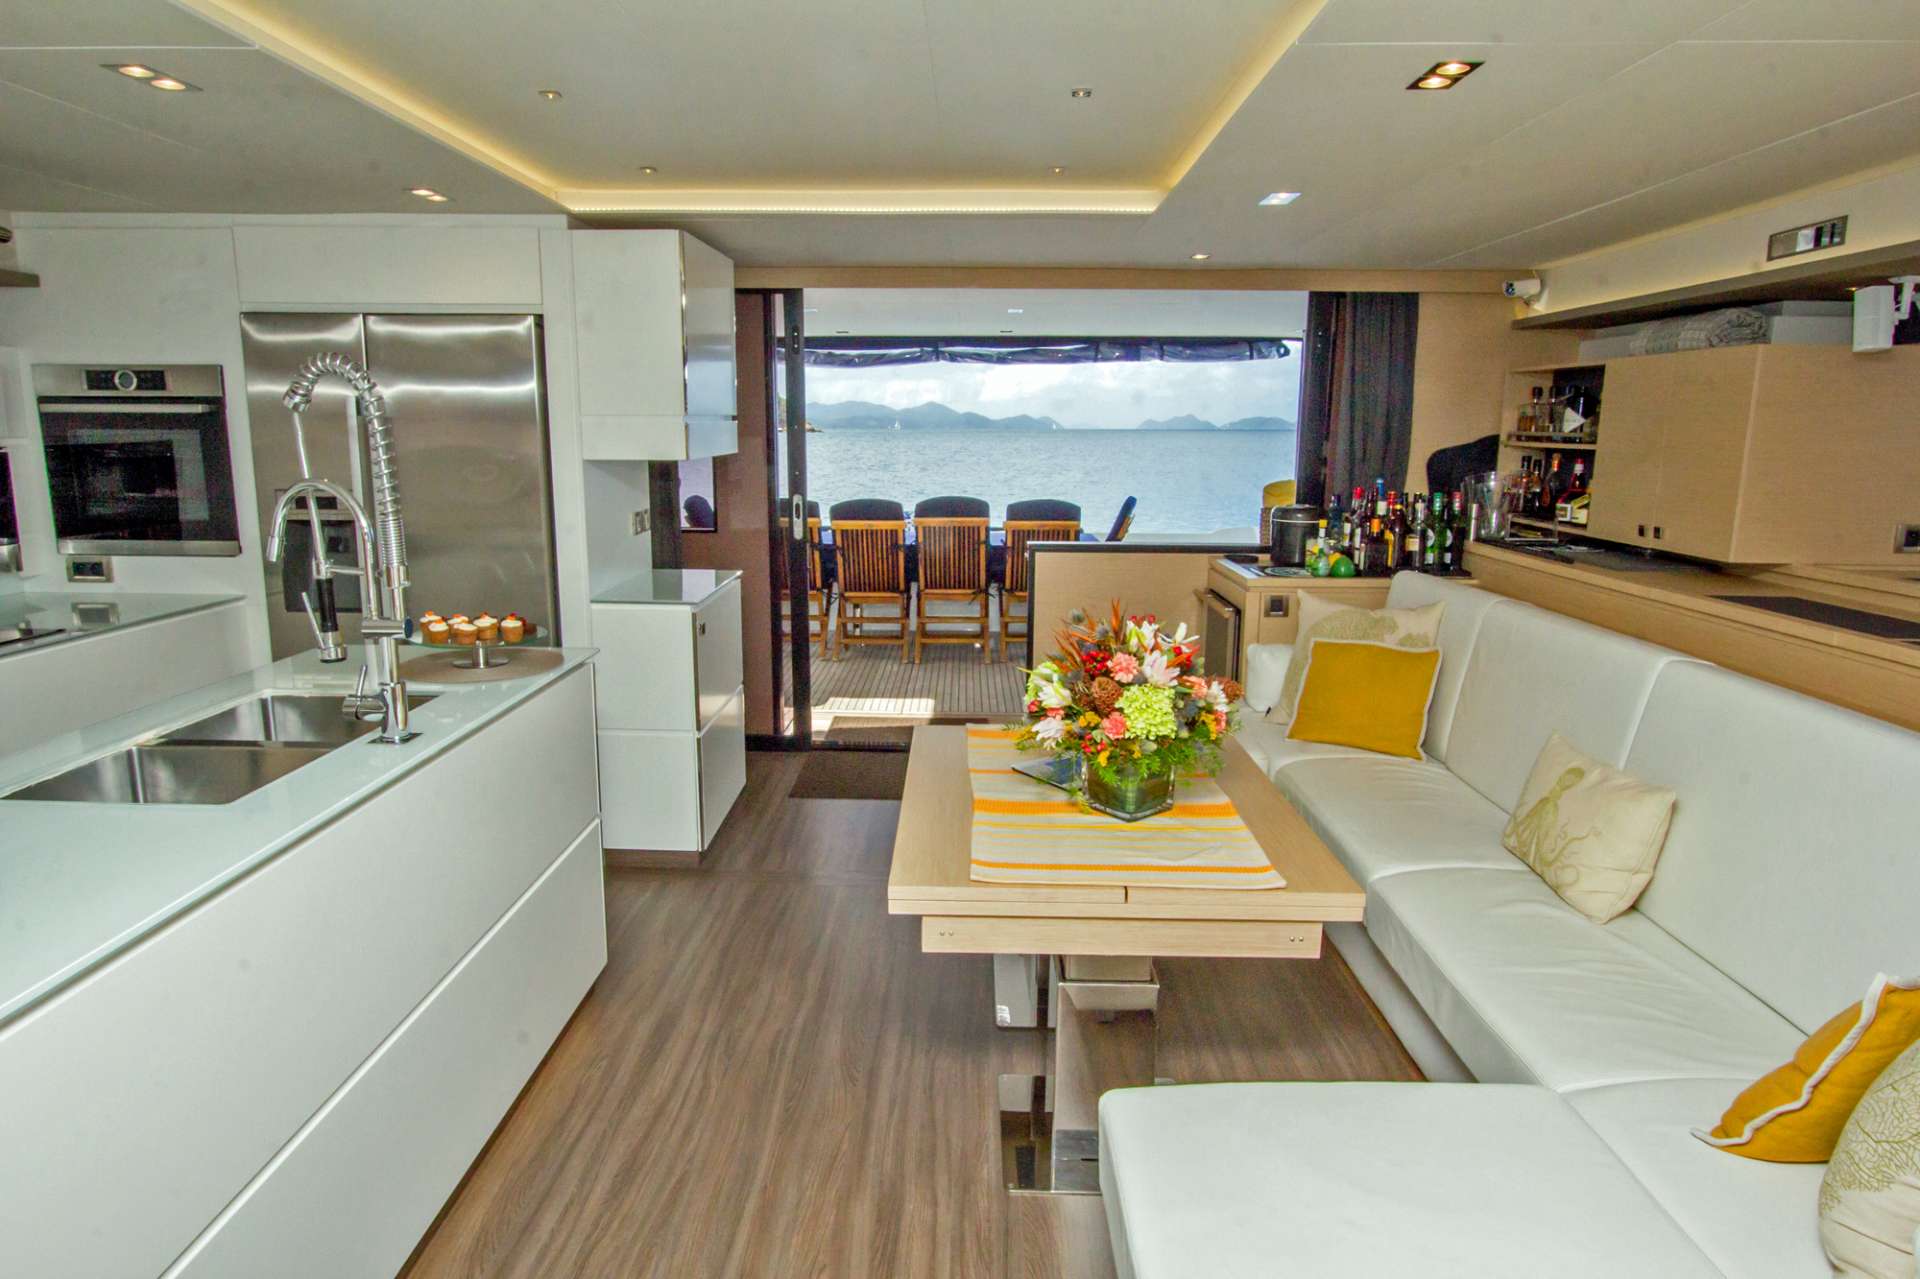 Catamaran Yacht 'NENNE' Gorgeous Main Salon & Open Galley, 10 PAX, 3 Crew, 67.00 Ft, 20.00 Meters, Built 2017, Fountaine-Pajot, Refit Year The latest, 2020 electronics and equipment onboard. New larger tender June 2019